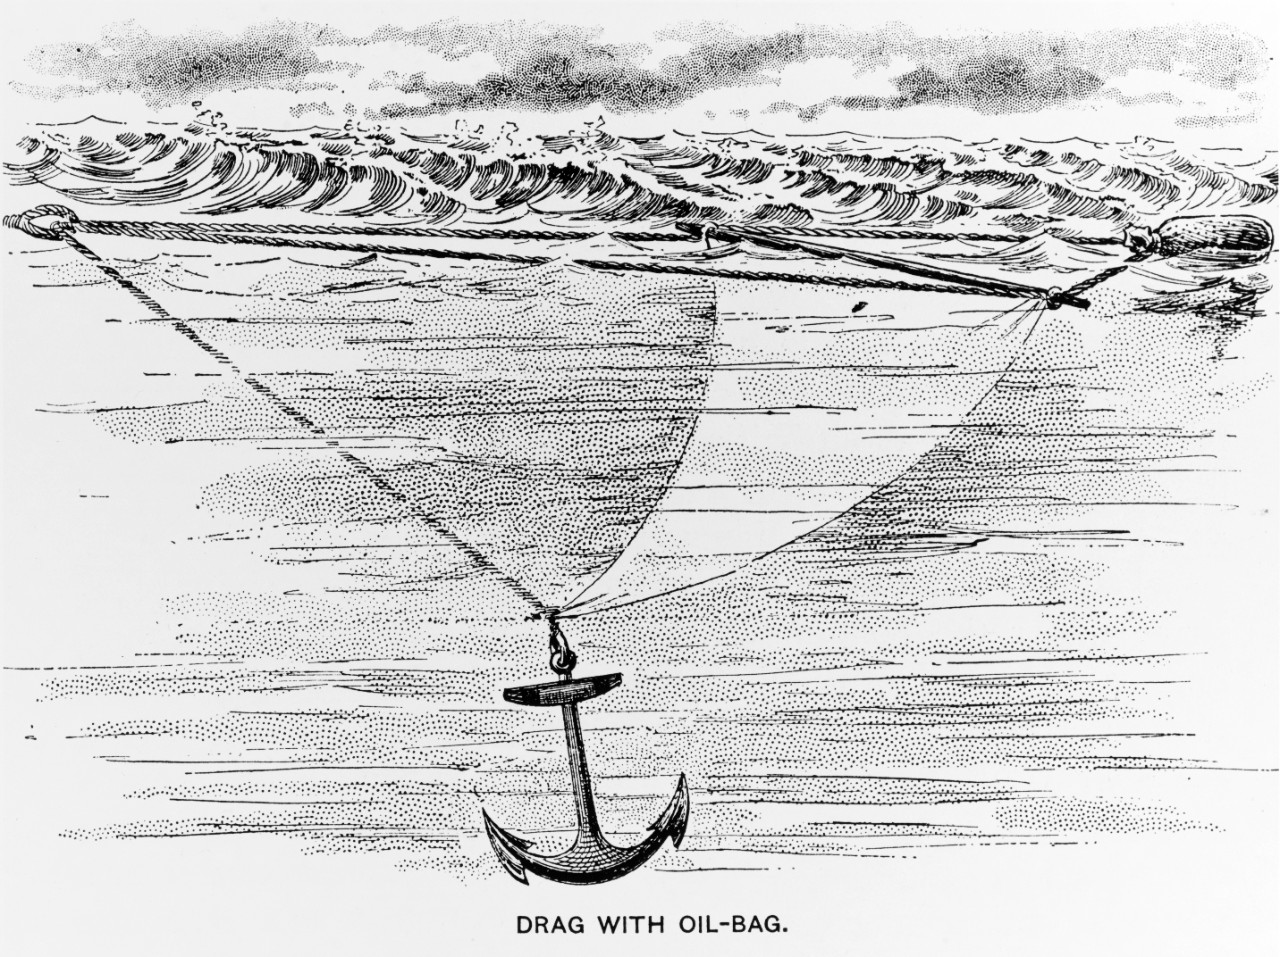 Drag with oil-bag, rigged to schooner OUNALASKA, which carried Lieutenant George M. Stoney to Hotham Inlet, 1884.